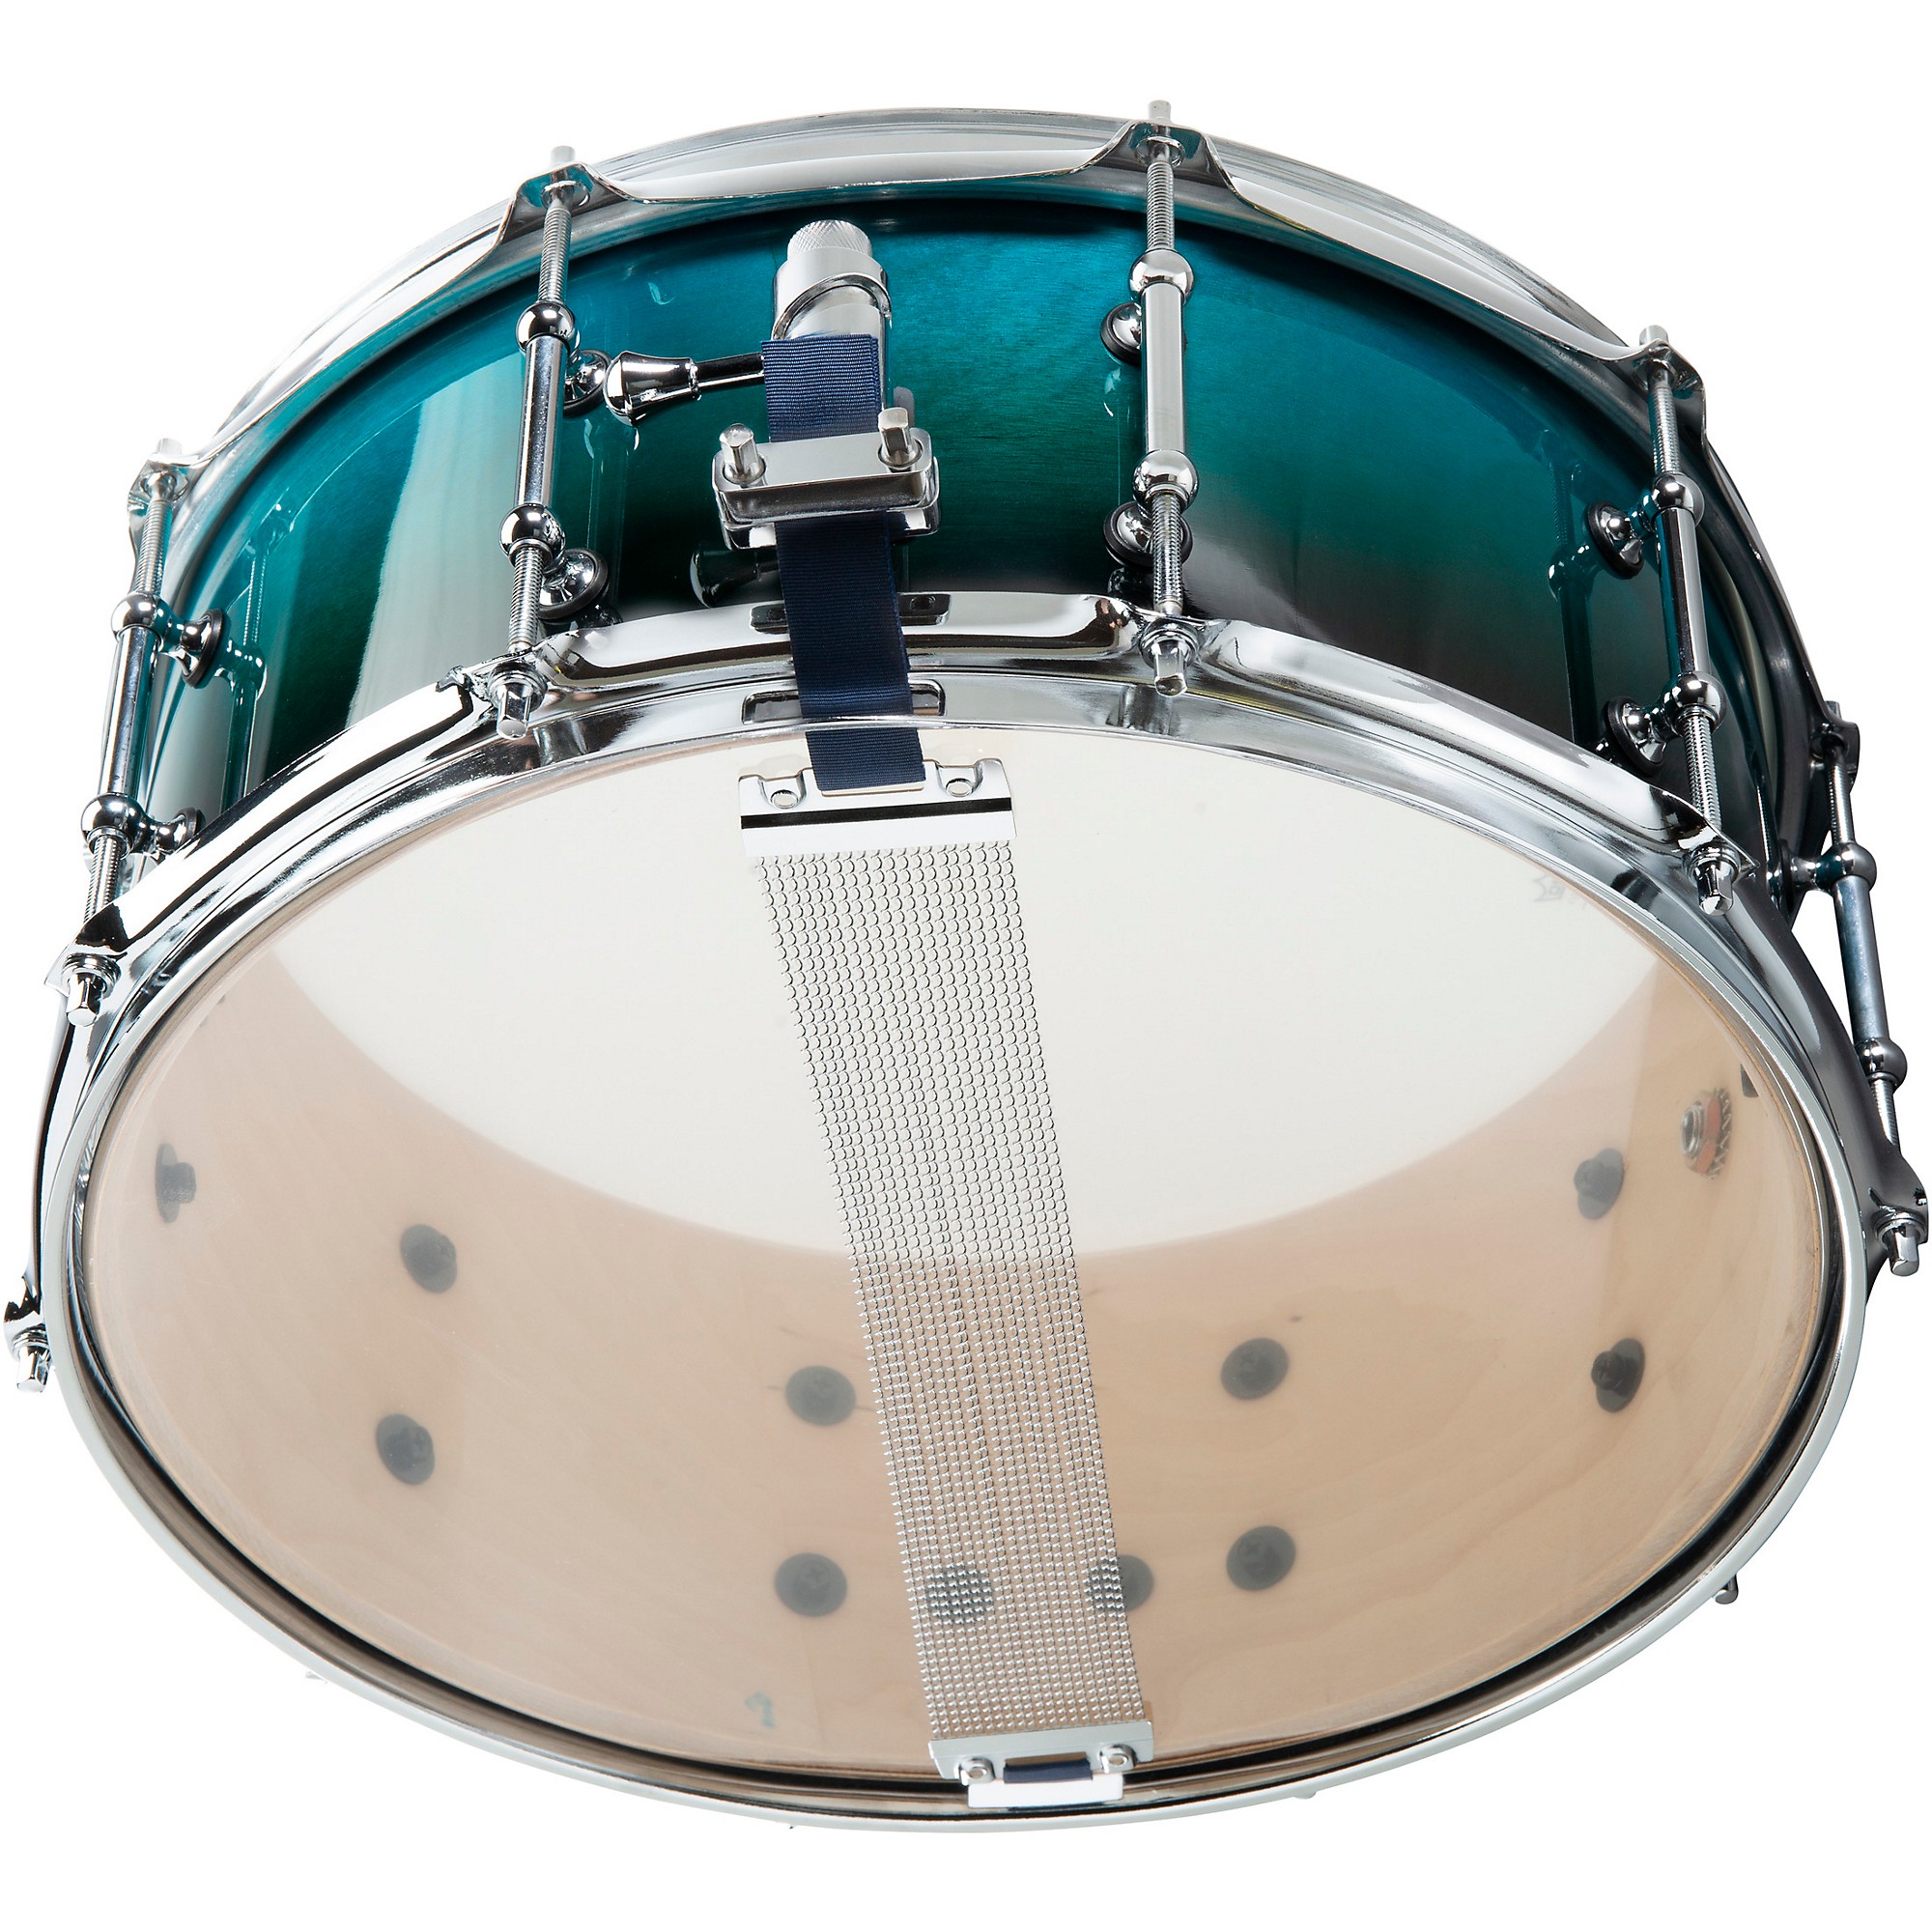 Sound Percussion Labs 468 Series Snare Drum 14 x 6 in. Turquoise